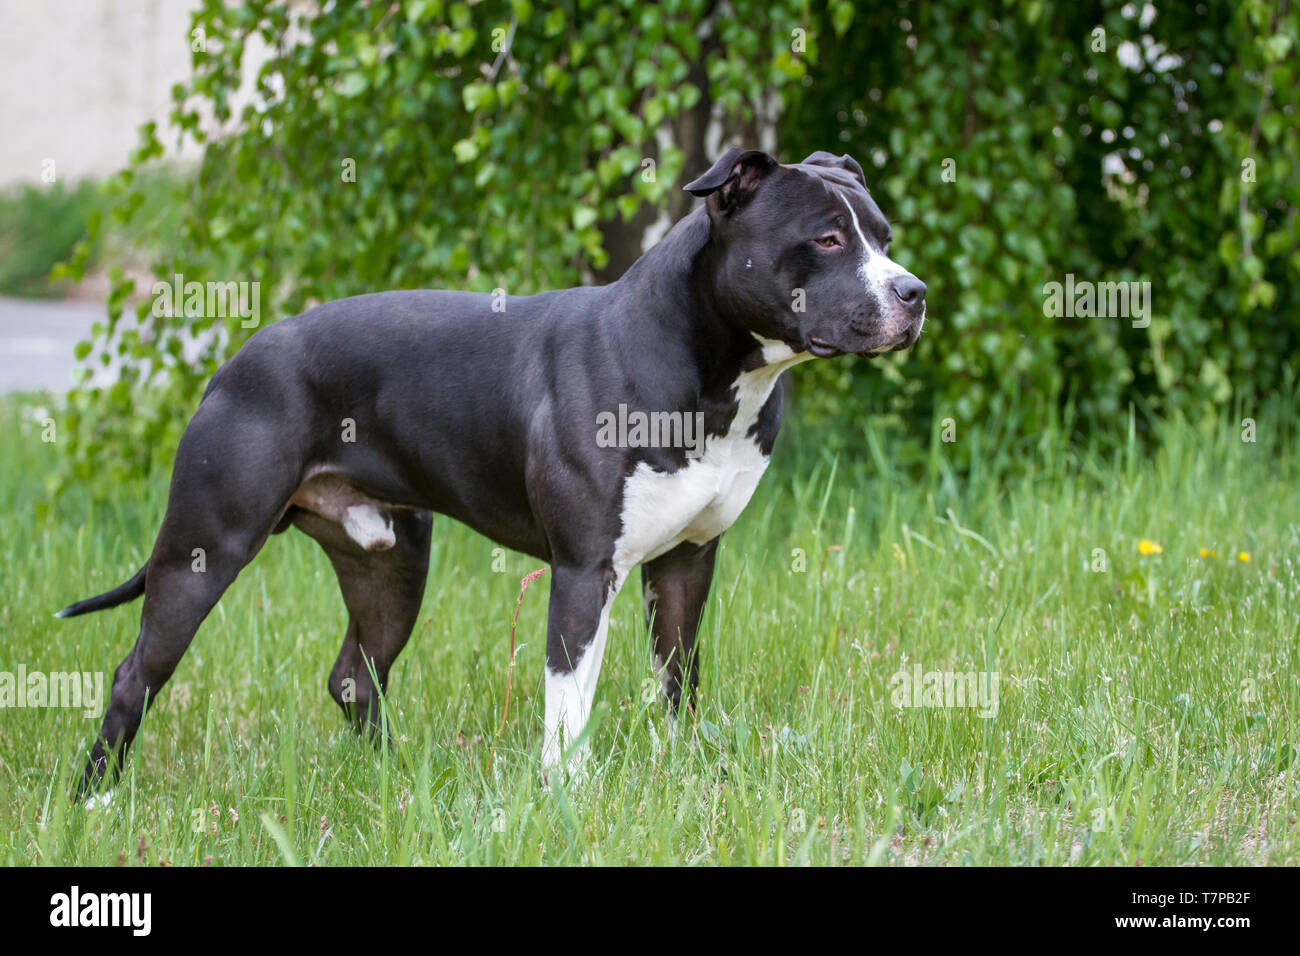 staffordshire terrier black and white